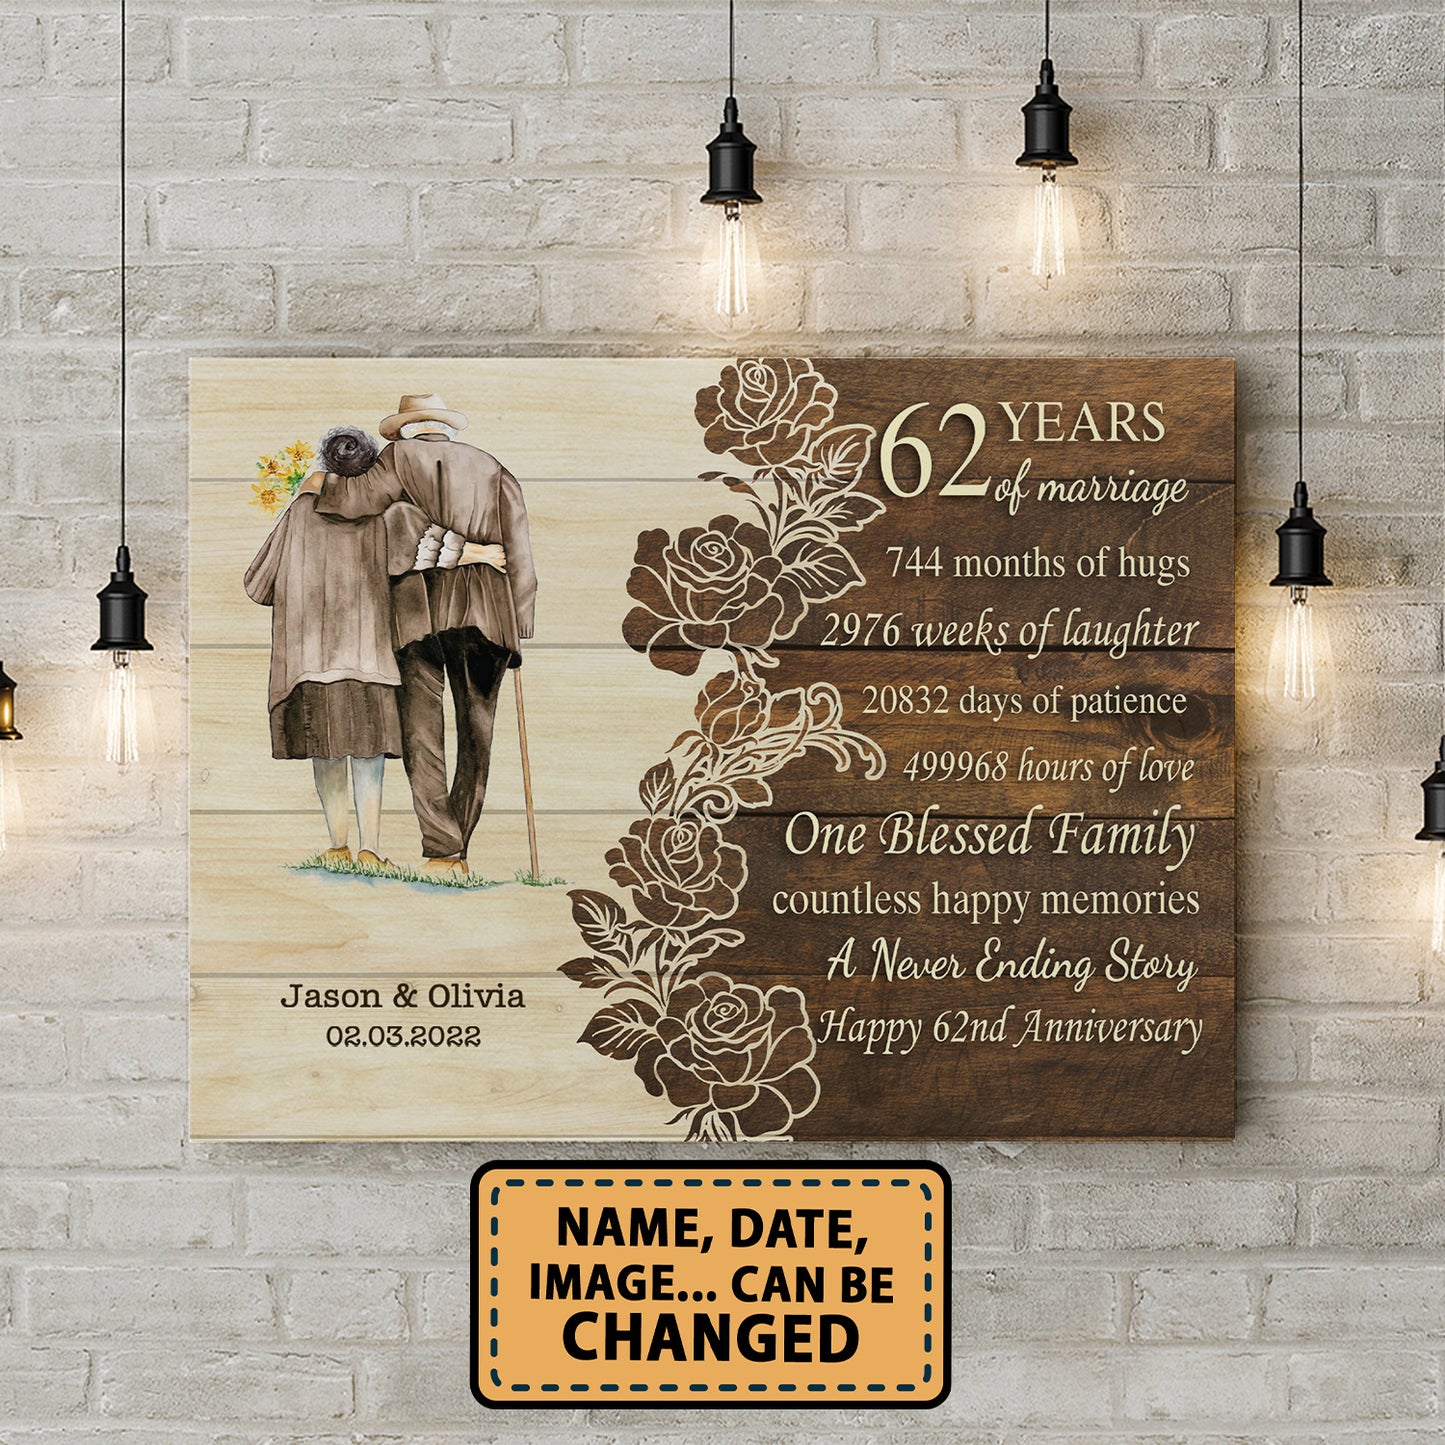 Happy 62nd Anniversary 62 Years Of Marriage Personalizedwitch Canvas